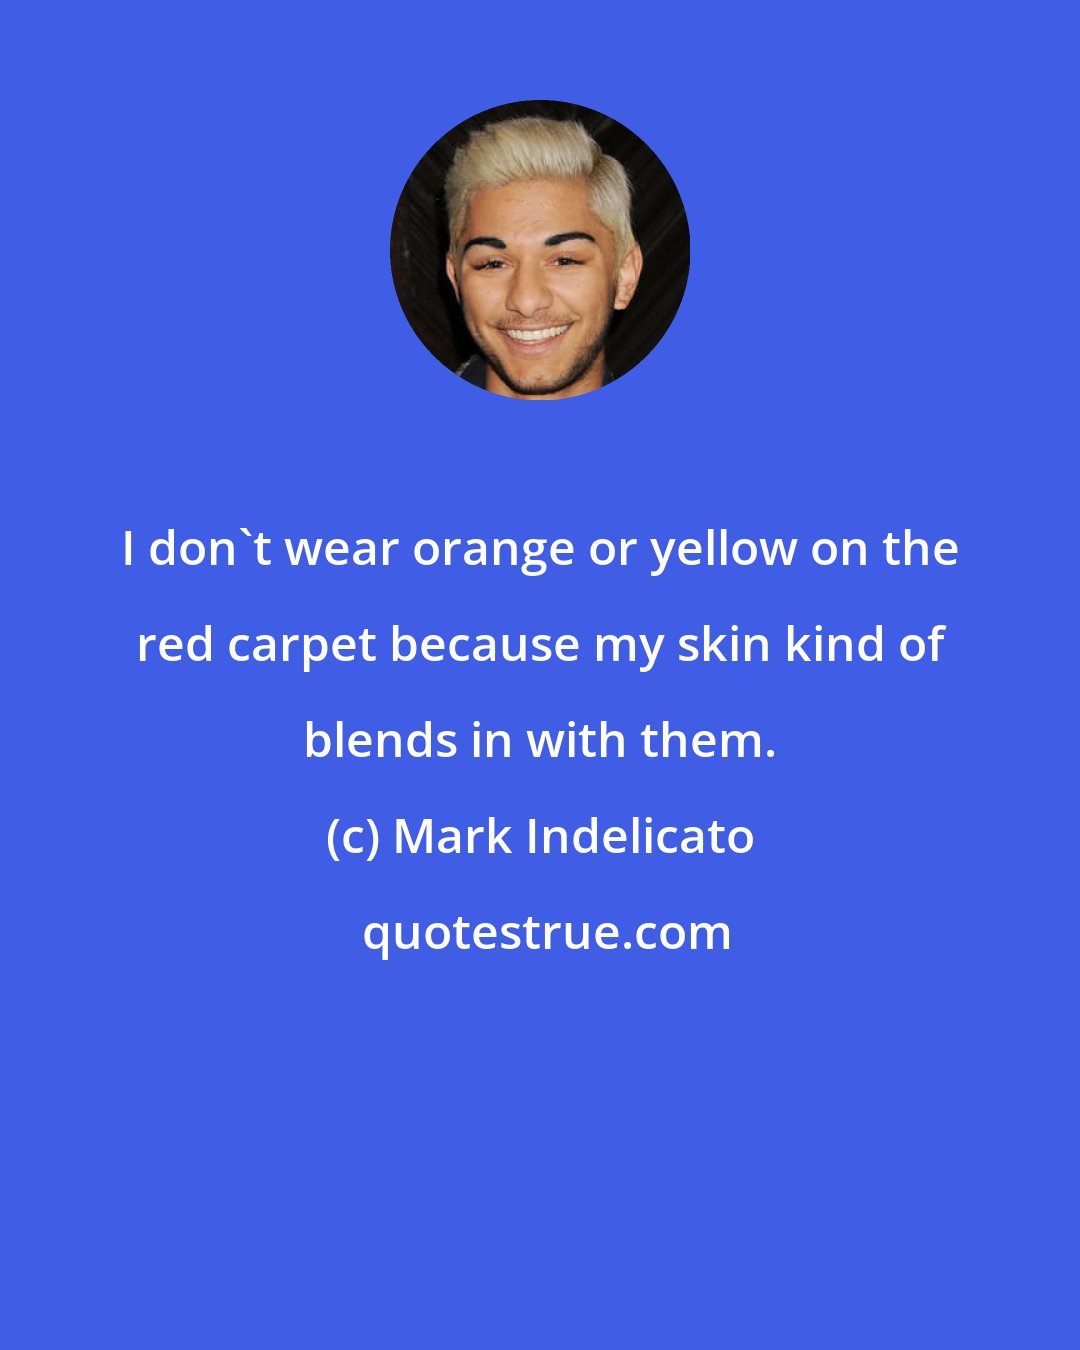 Mark Indelicato: I don't wear orange or yellow on the red carpet because my skin kind of blends in with them.